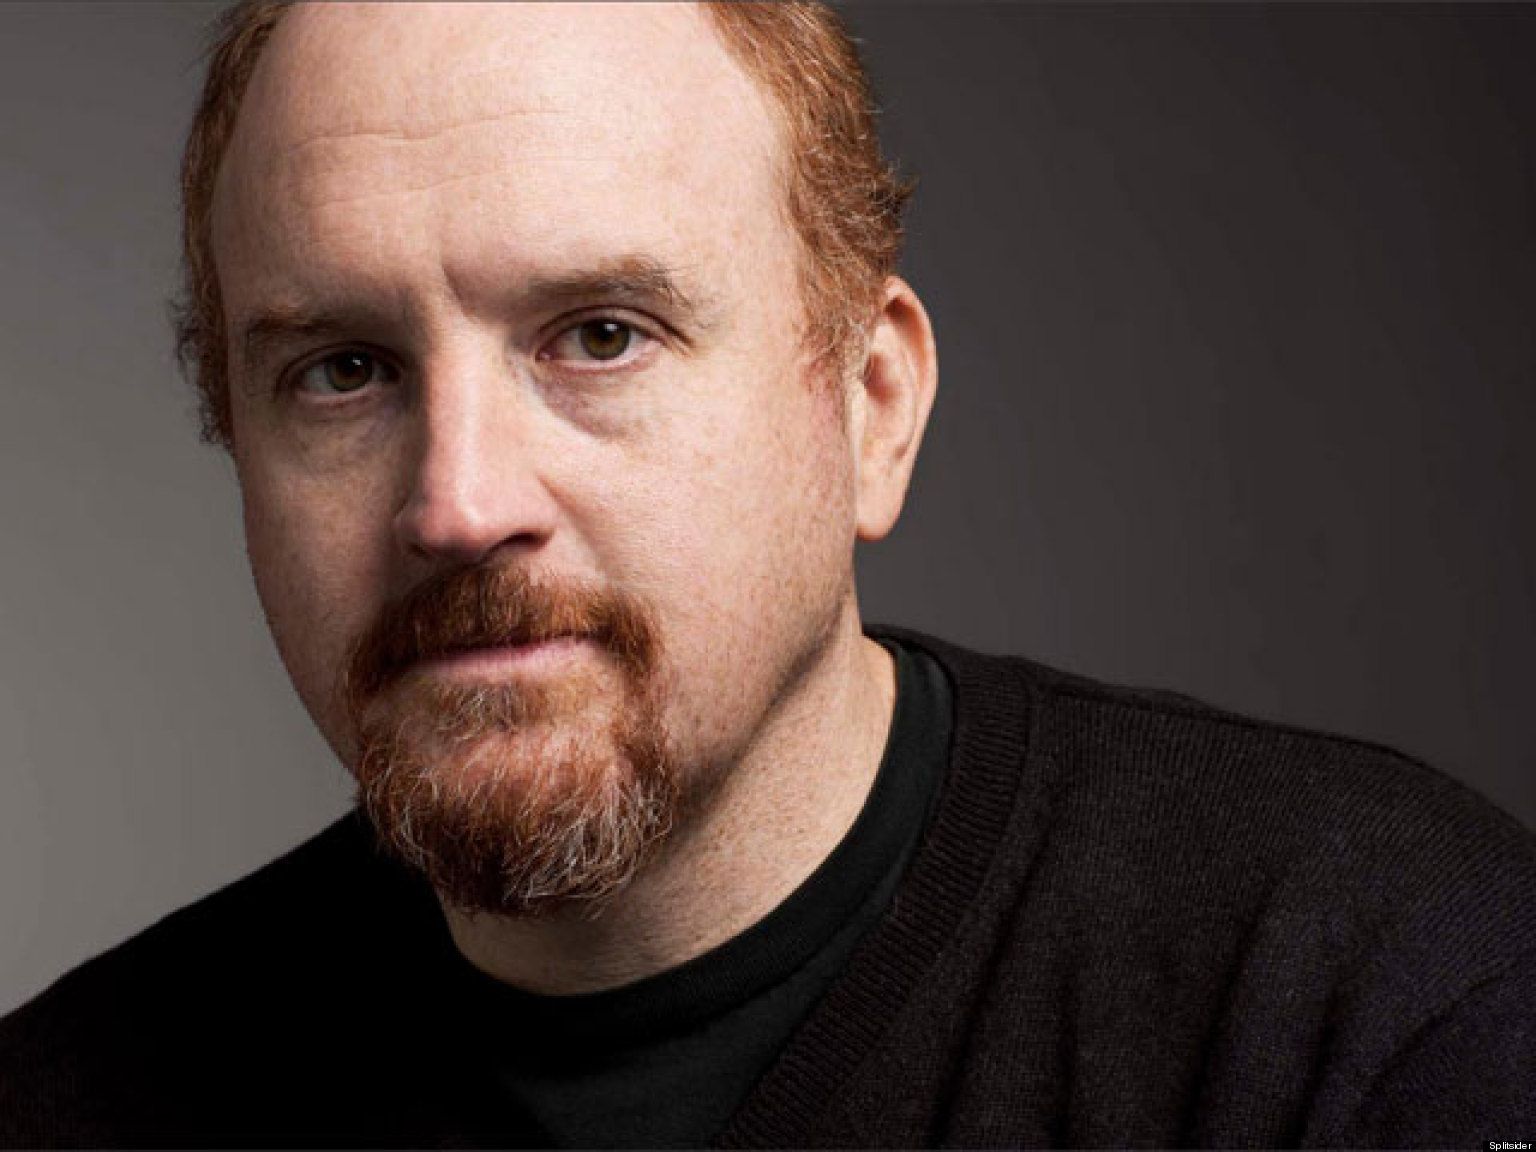 In Louis C.K.'s New Comedy Special 'Sorry' the Joke Is on Us